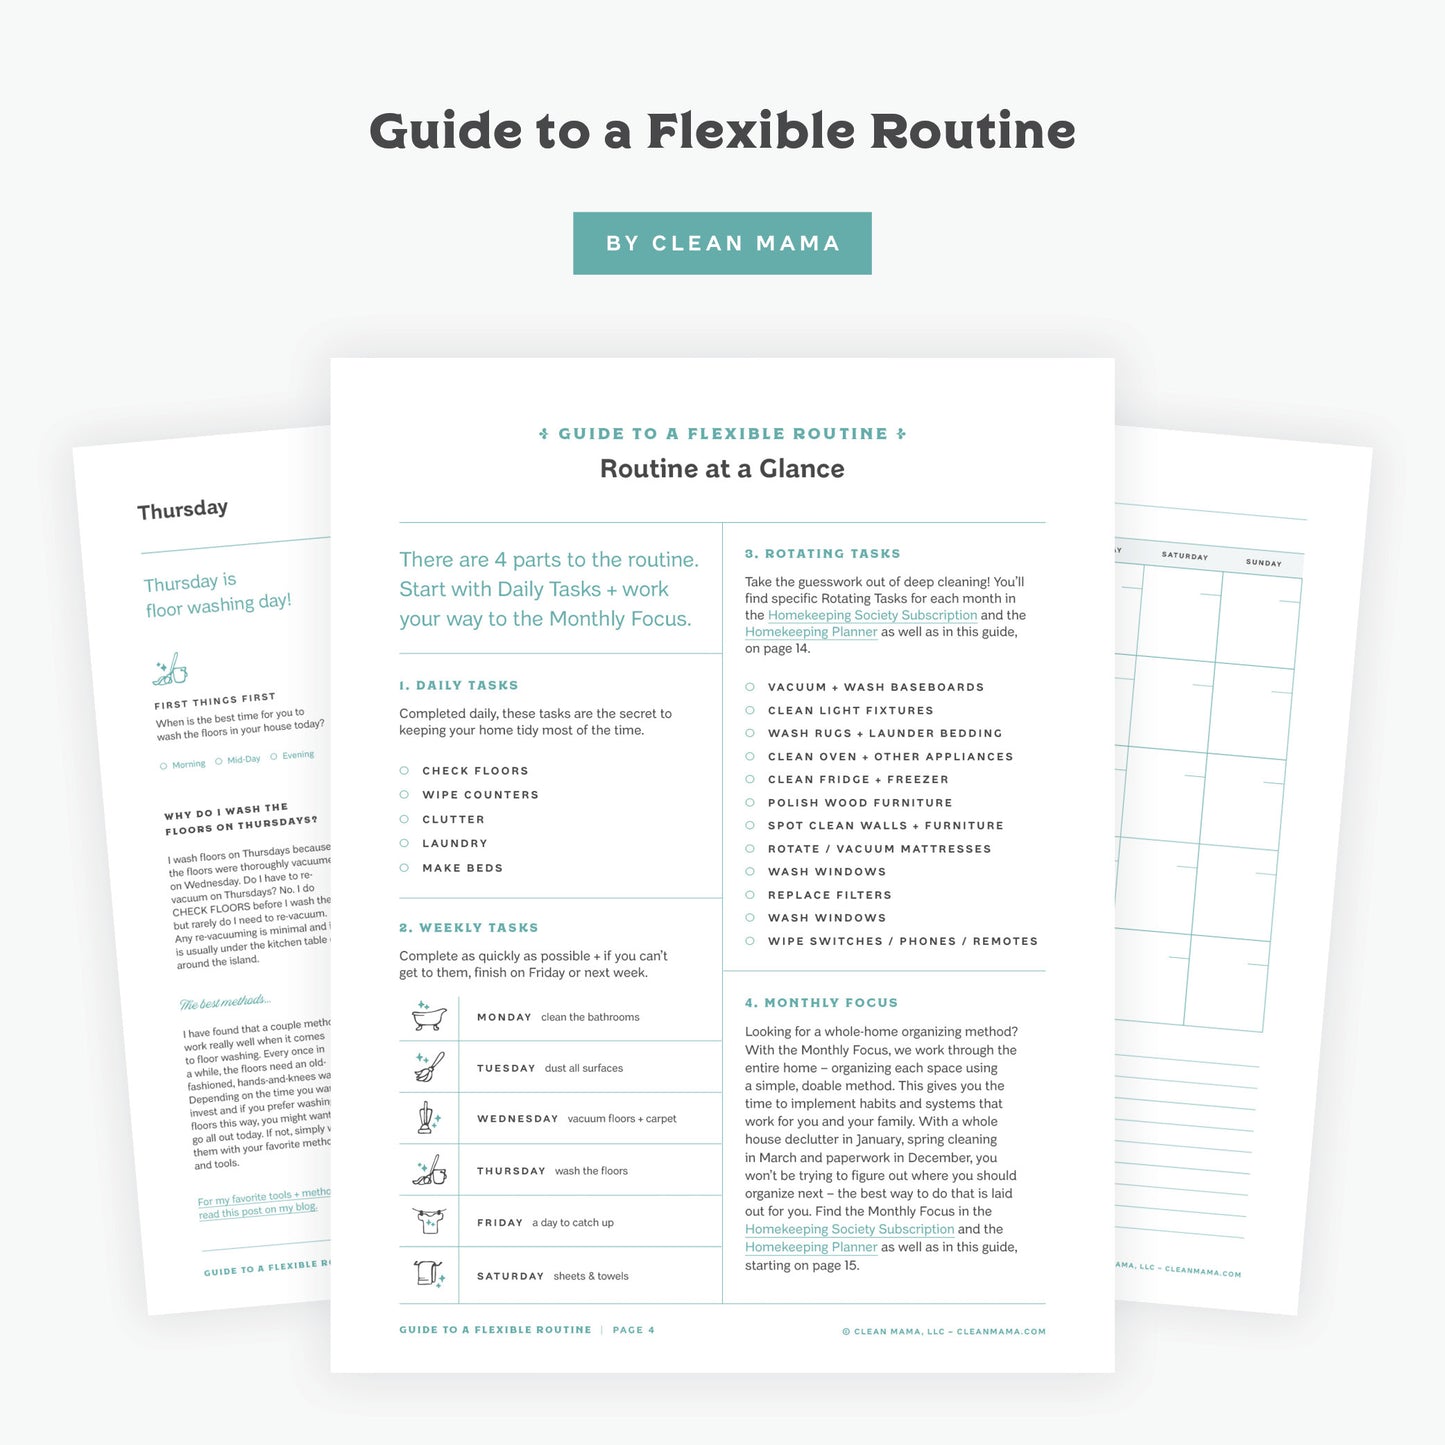 Guide to a Flexible Routine